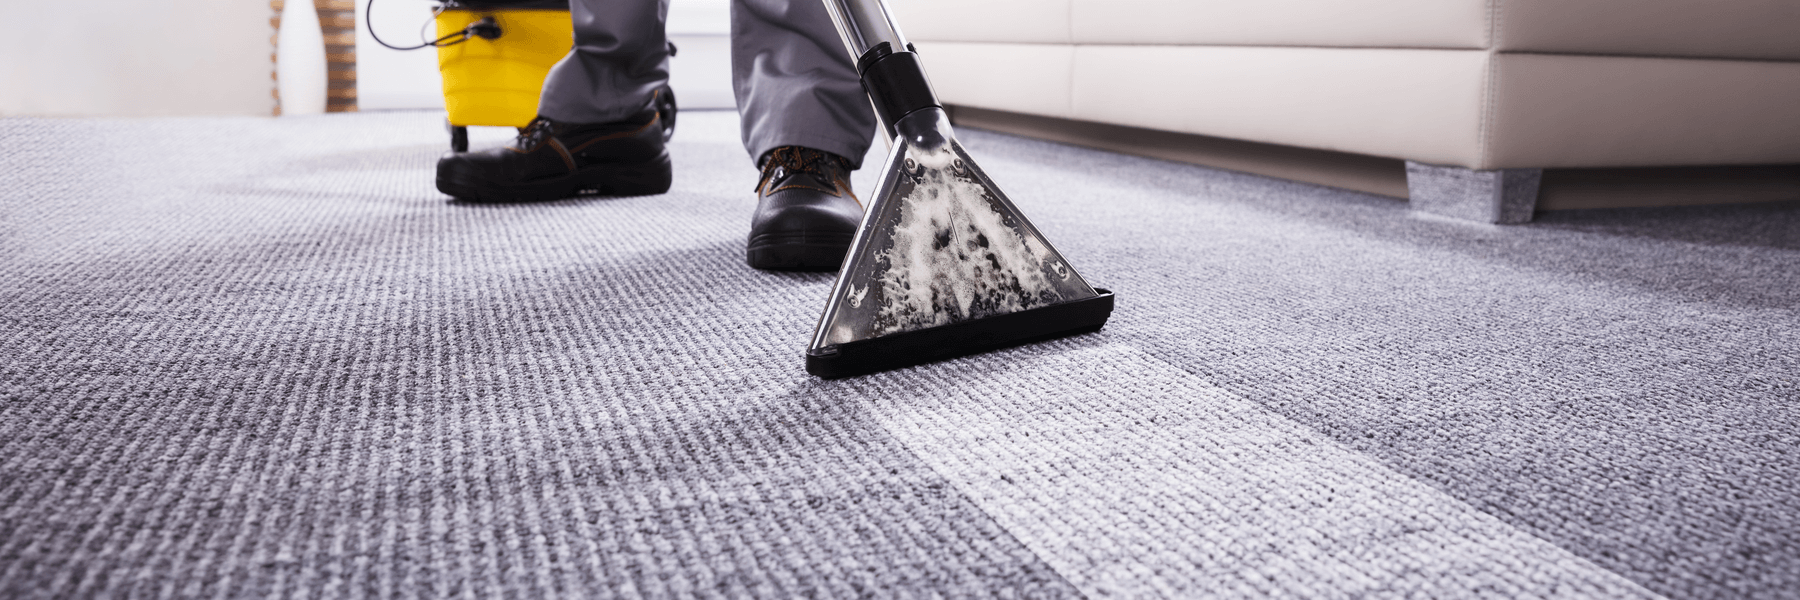 Professional carpet cleaner cleaning carpet